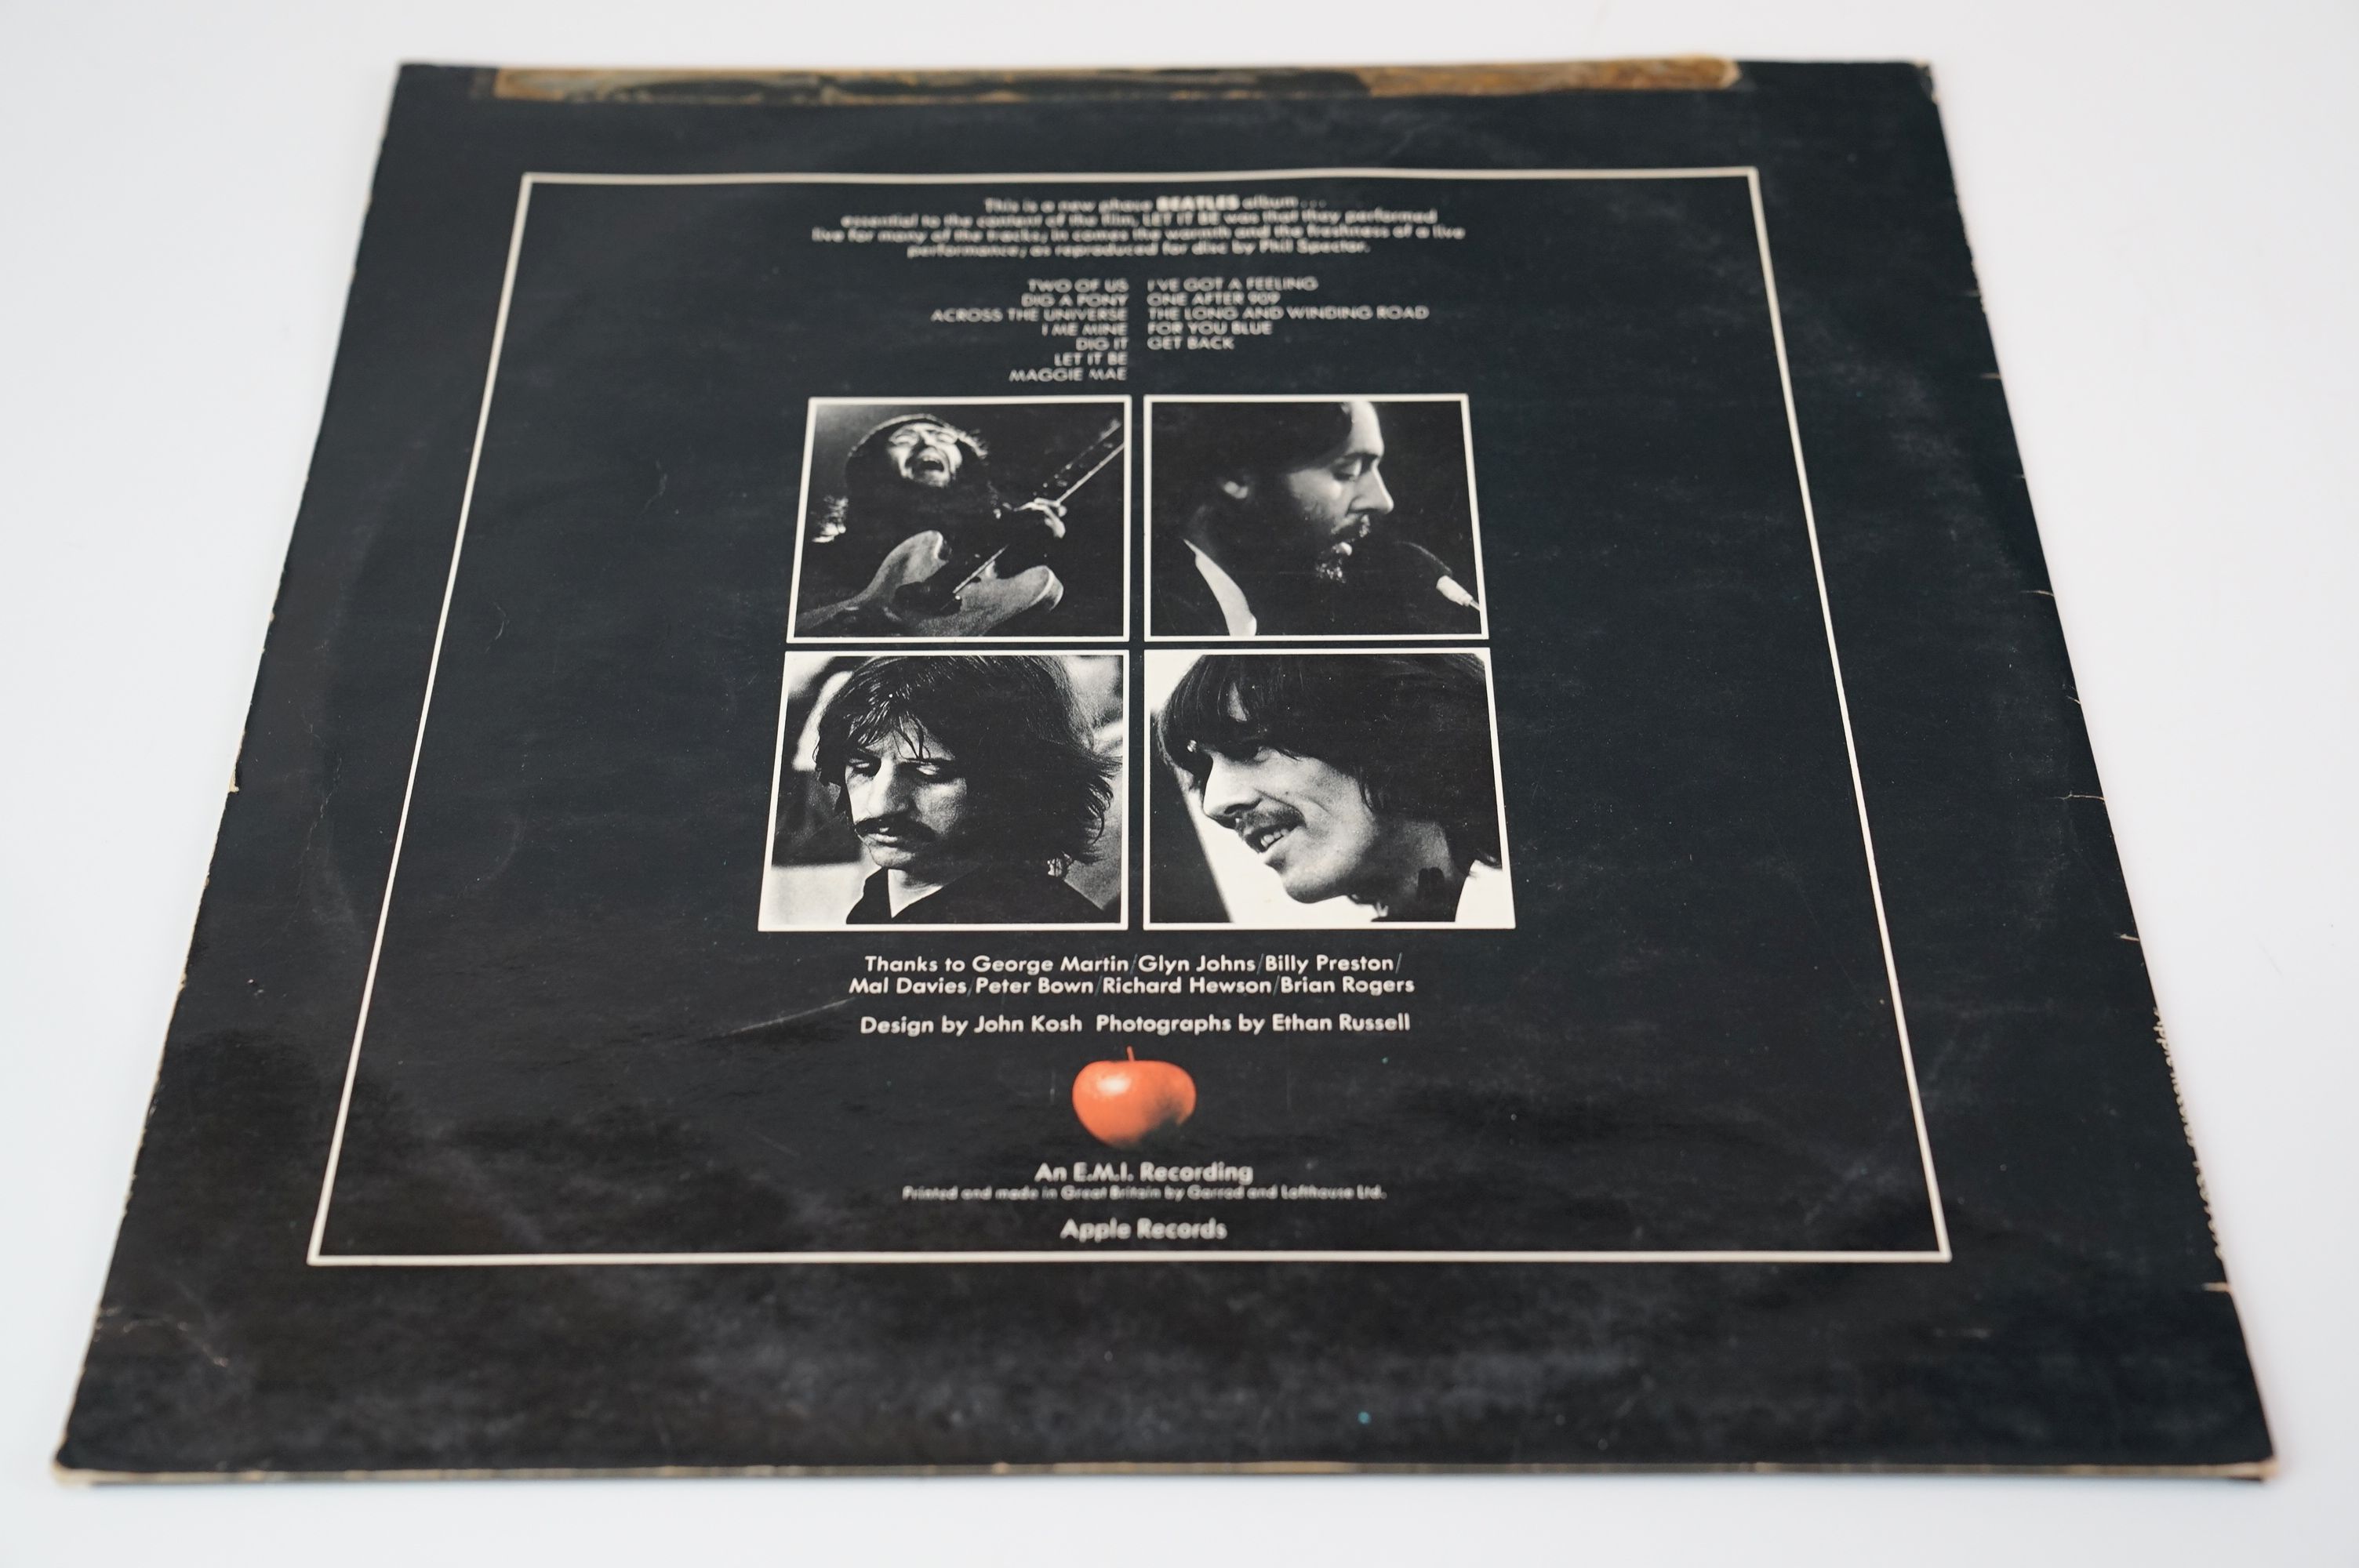 Vinyl - The Beatles Let It Be Box set with record and book, laminated cover, vg overall - Image 10 of 10